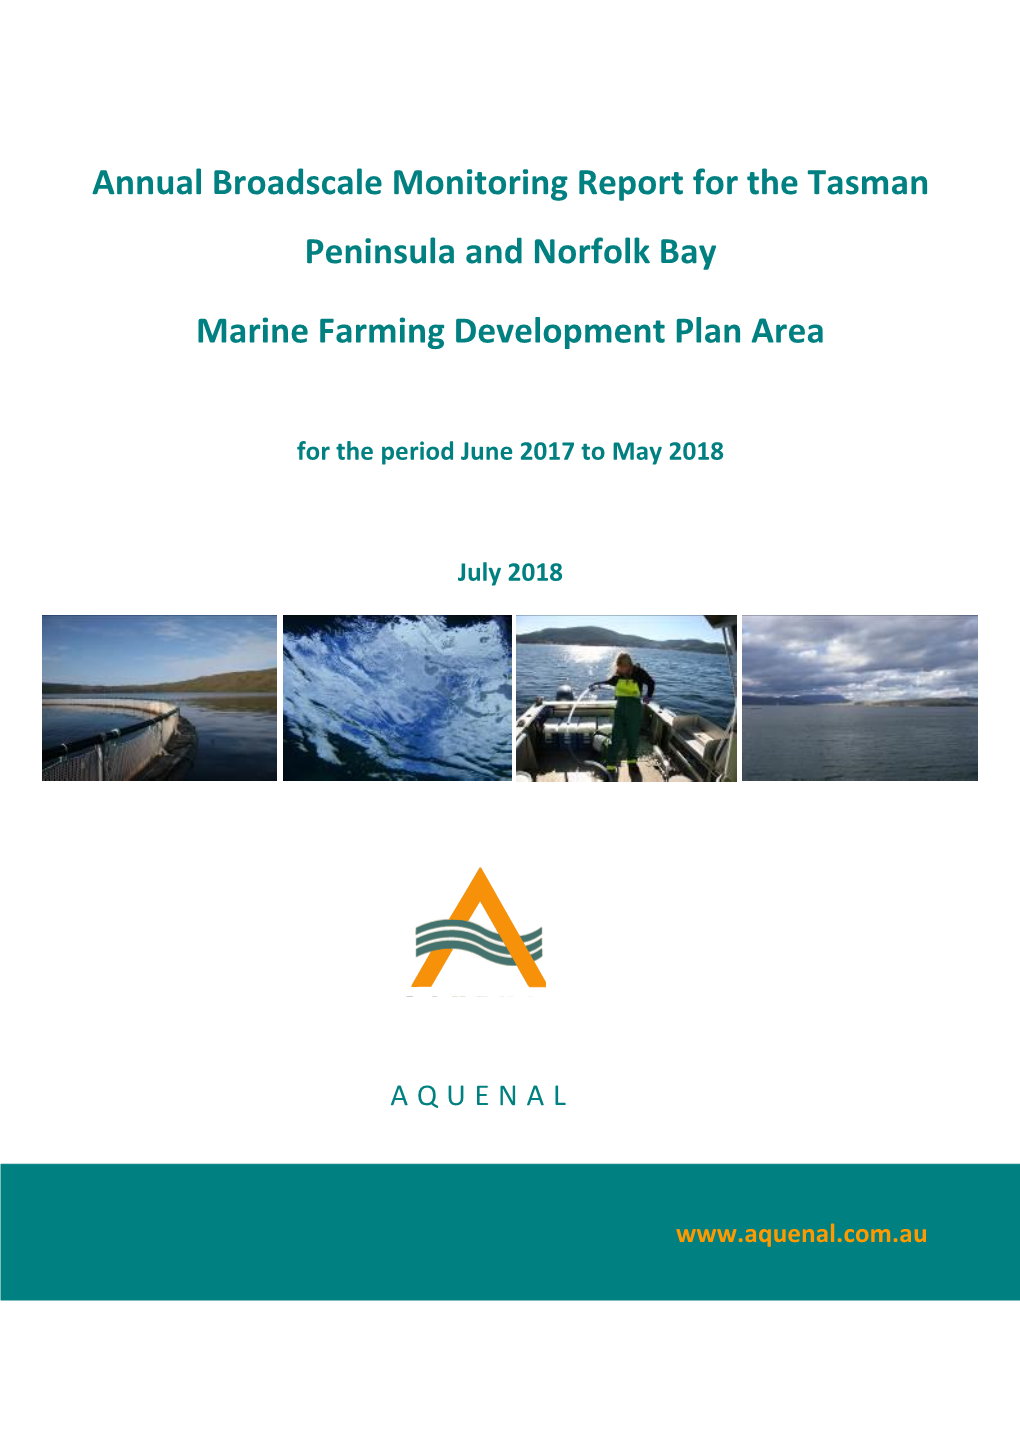 Annual Broadscale Monitoring Report for the Tasman Peninsula and Norfolk Bay